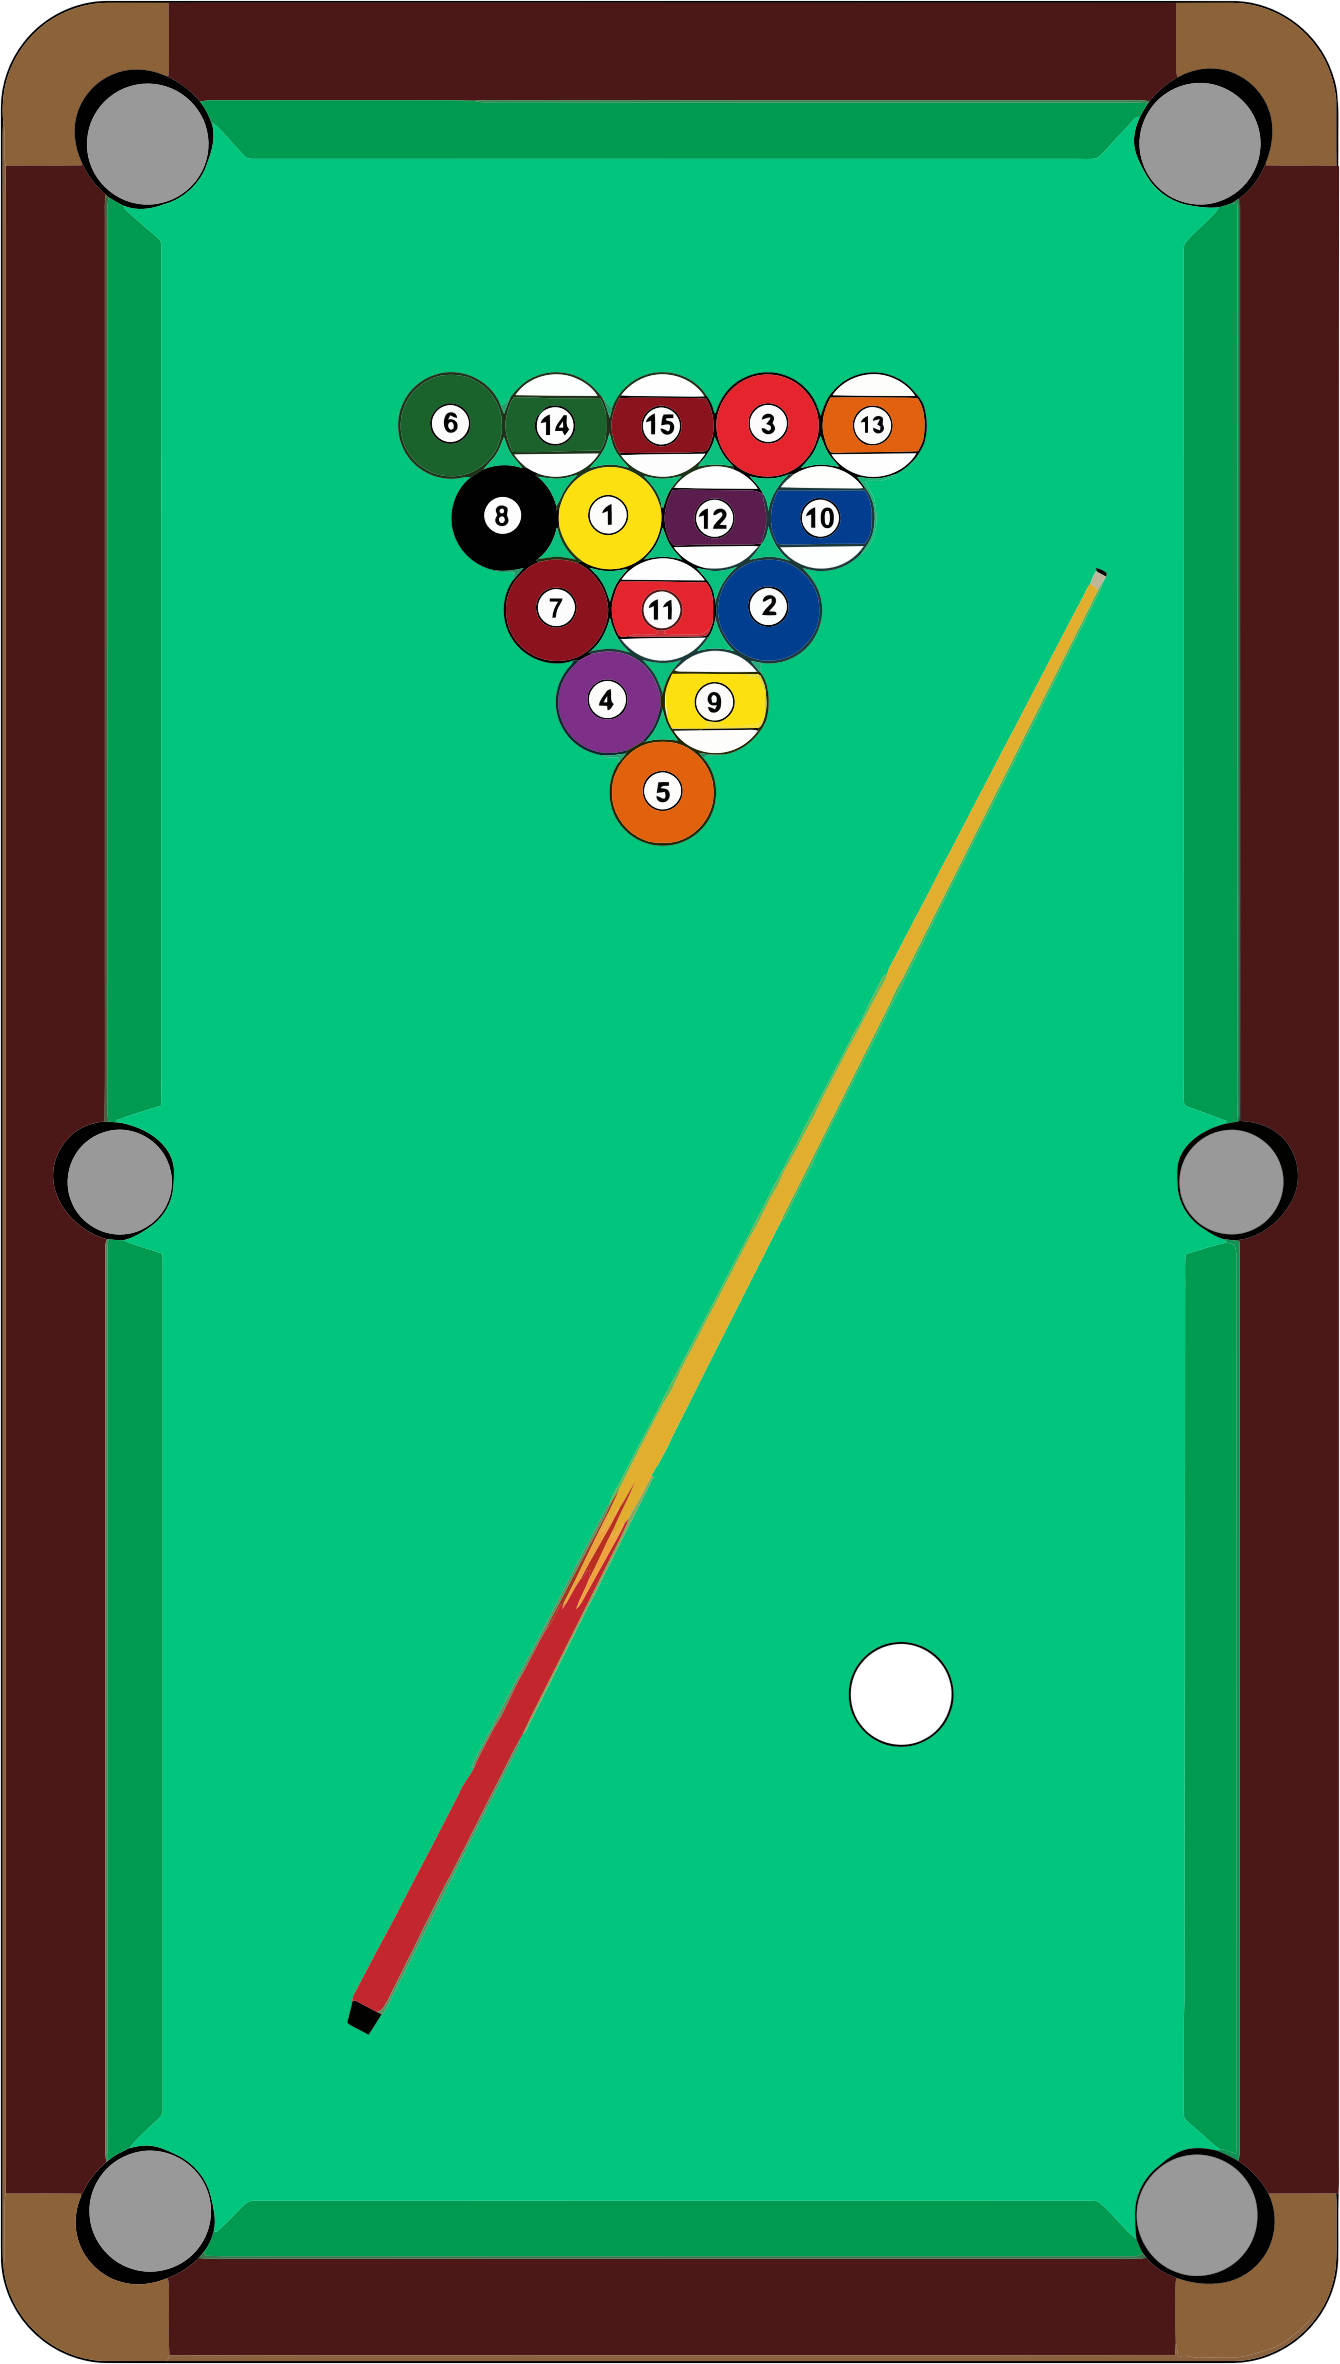 Pool table - Vector Graphic